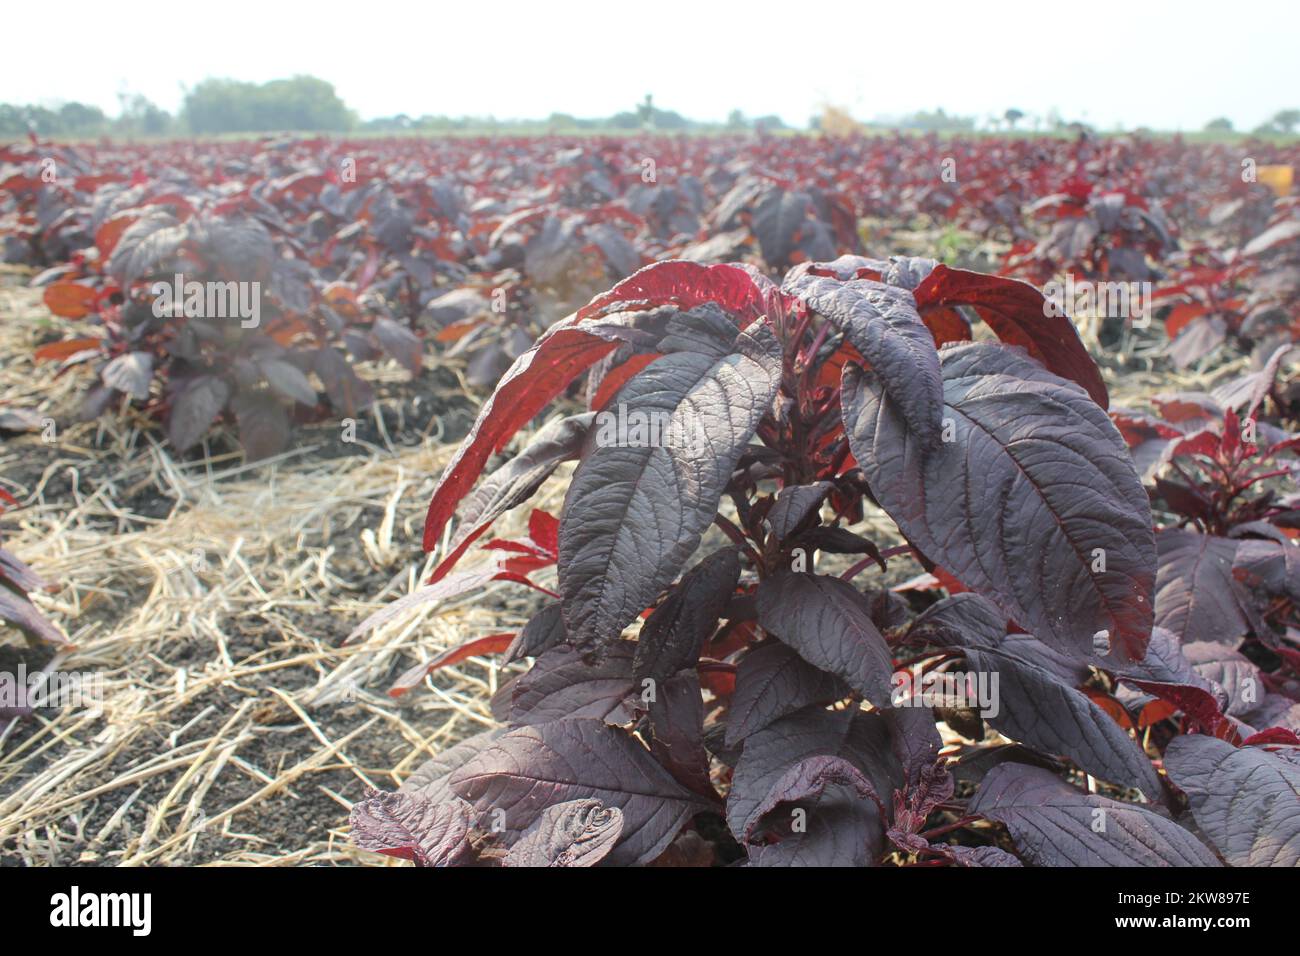 red spinach in the fields Stock Photo